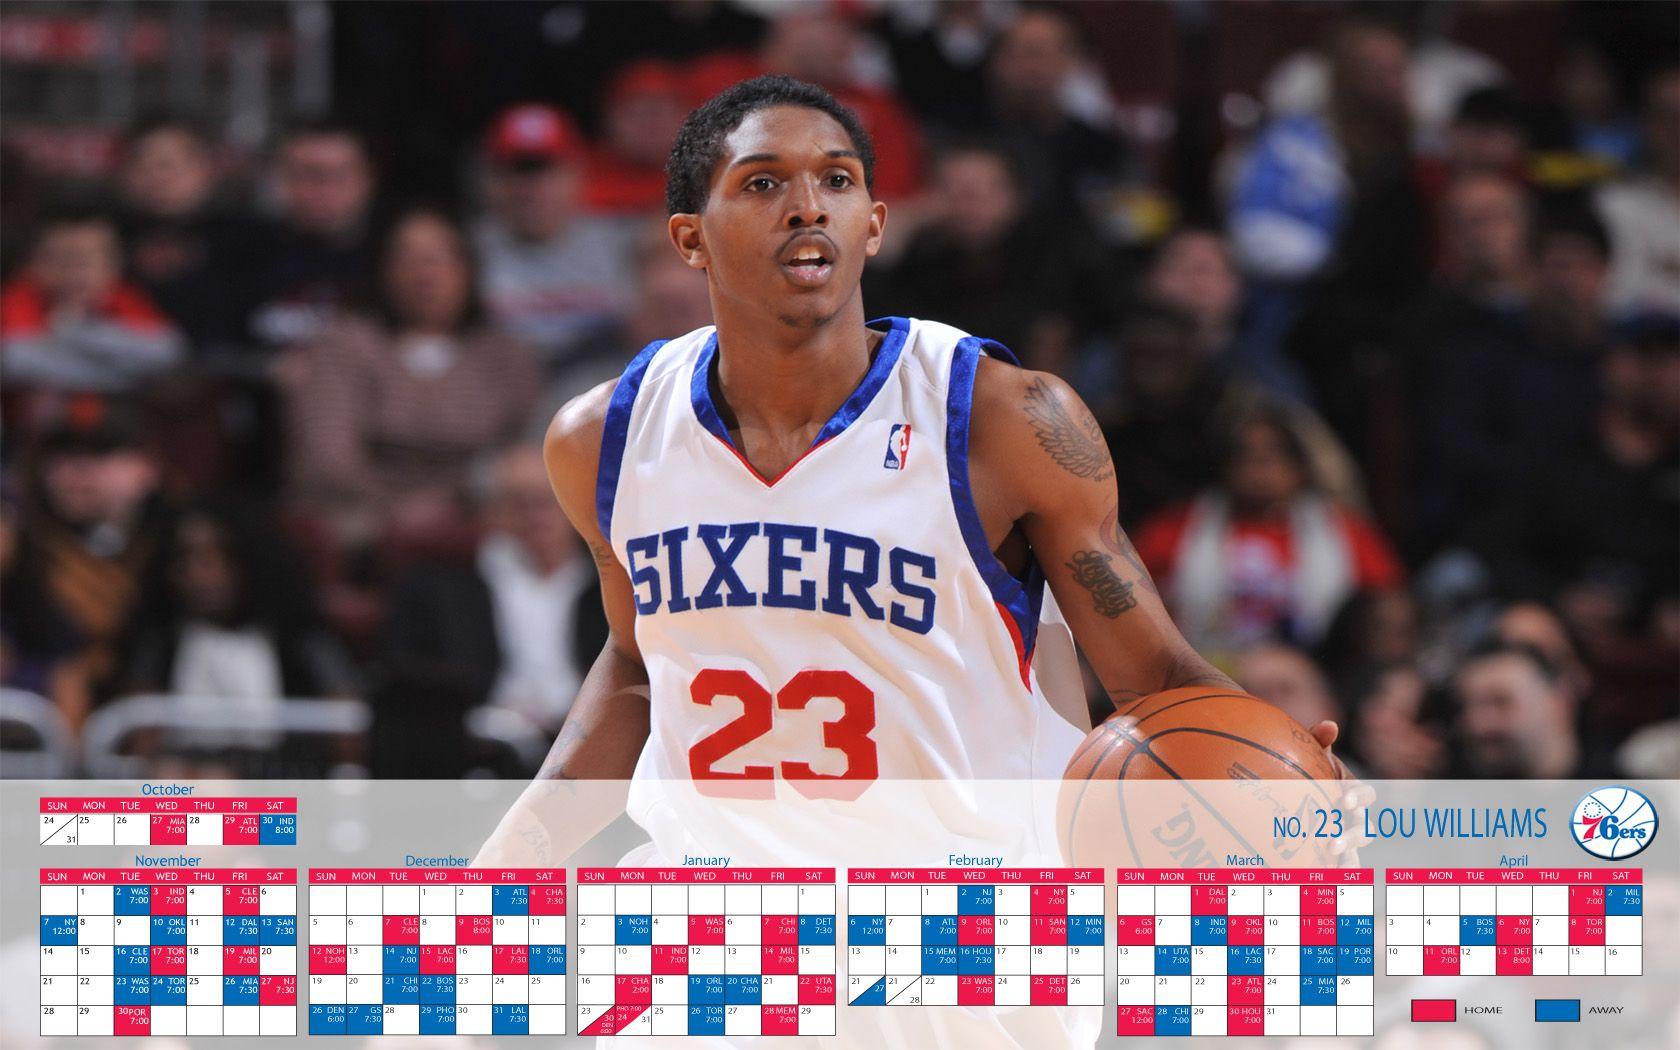 Sixers Wallpaper. THE OFFICIAL SITE OF THE PHILADELPHIA 76ERS